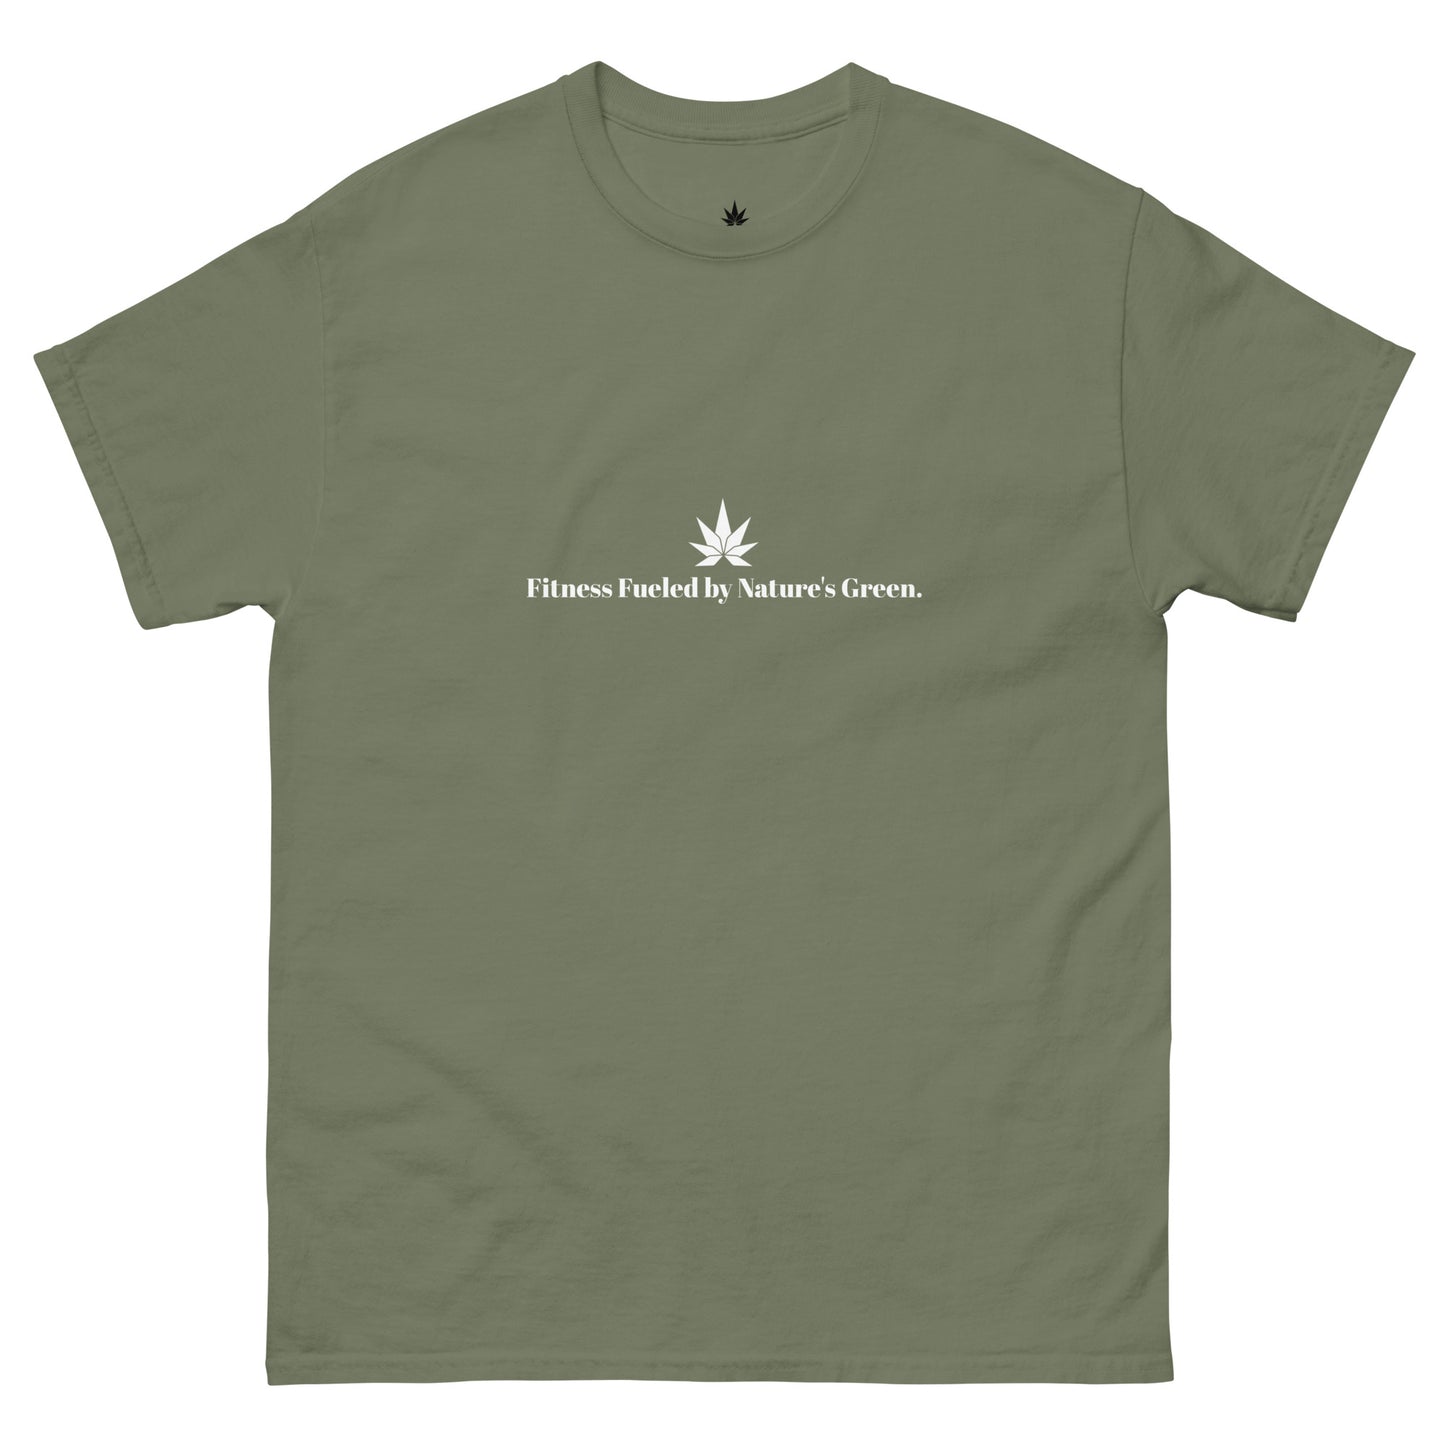 Fitness Fueled by Nature's Green Men's Classic Tee